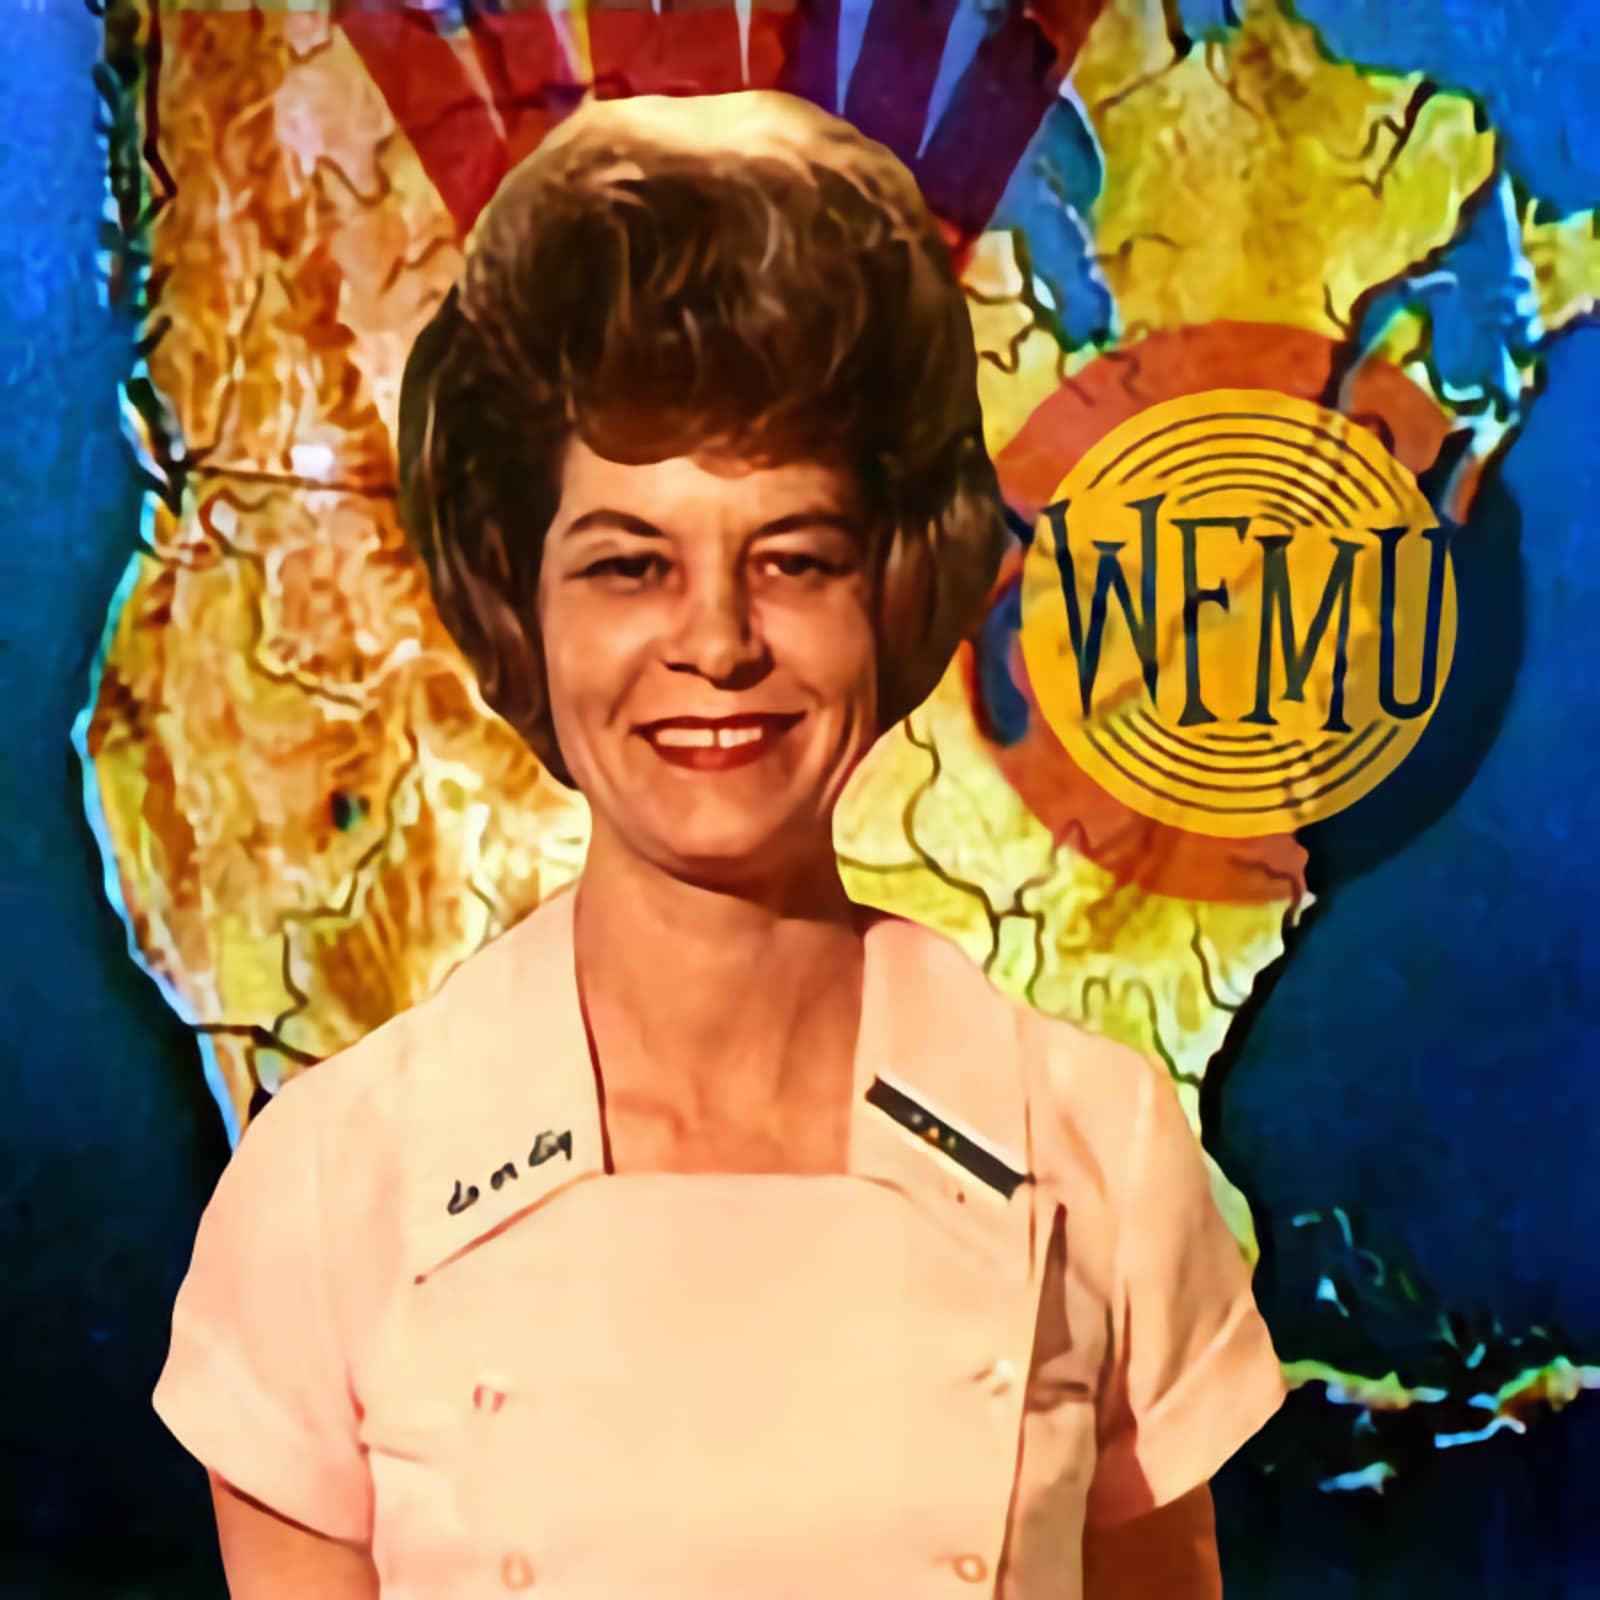 Radio Clash mentioned and played on WFMU’s Do or DIY show